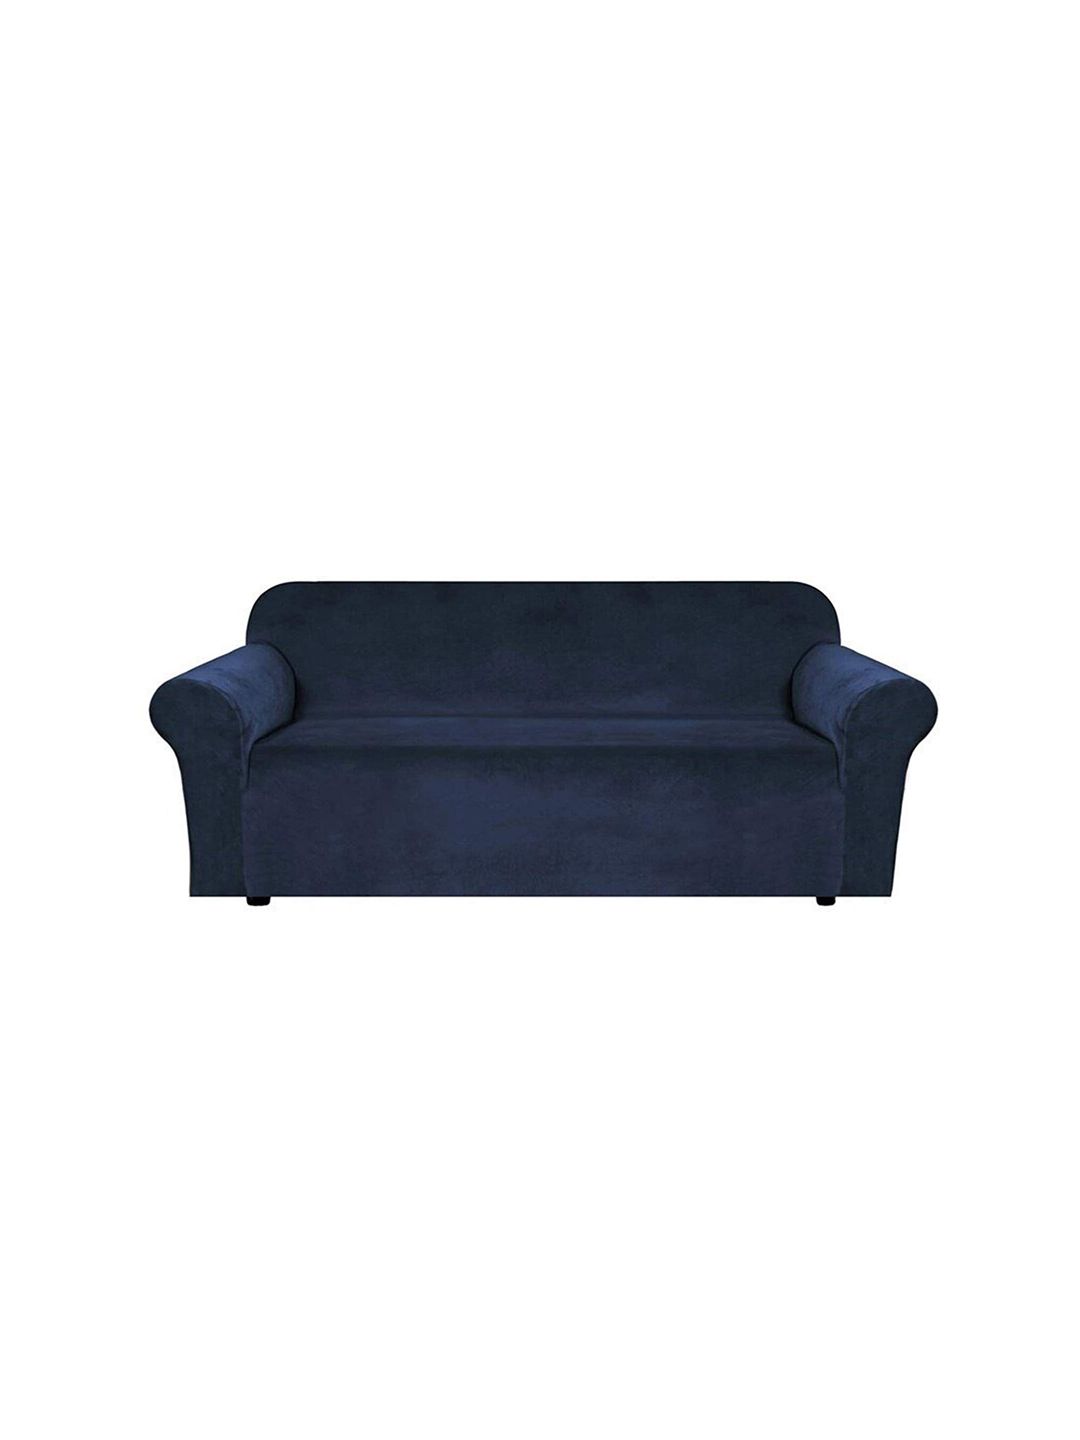 HOUSE OF QUIRK Navy Blue Solid 1-Seater Sofa Cover Price in India